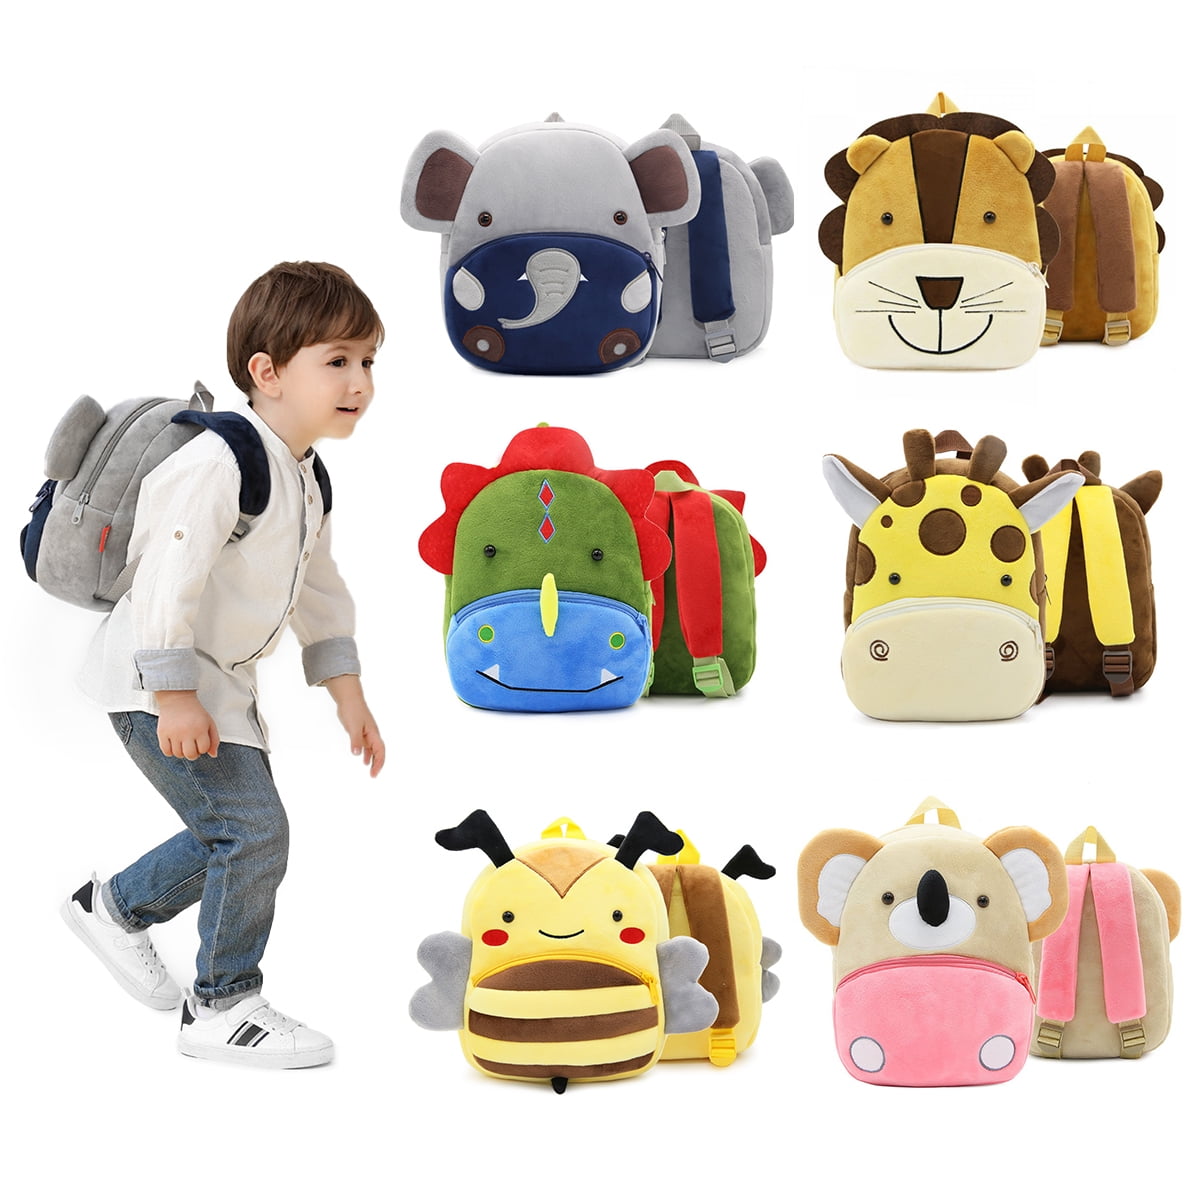 Buy DZert Panda Kids School Bag Soft Plush Backpack Cartoon Toy, Children's  Gifts Boy Girl Baby School Bag for Kids (Light Blue) Online at Low Prices  in India - Amazon.in